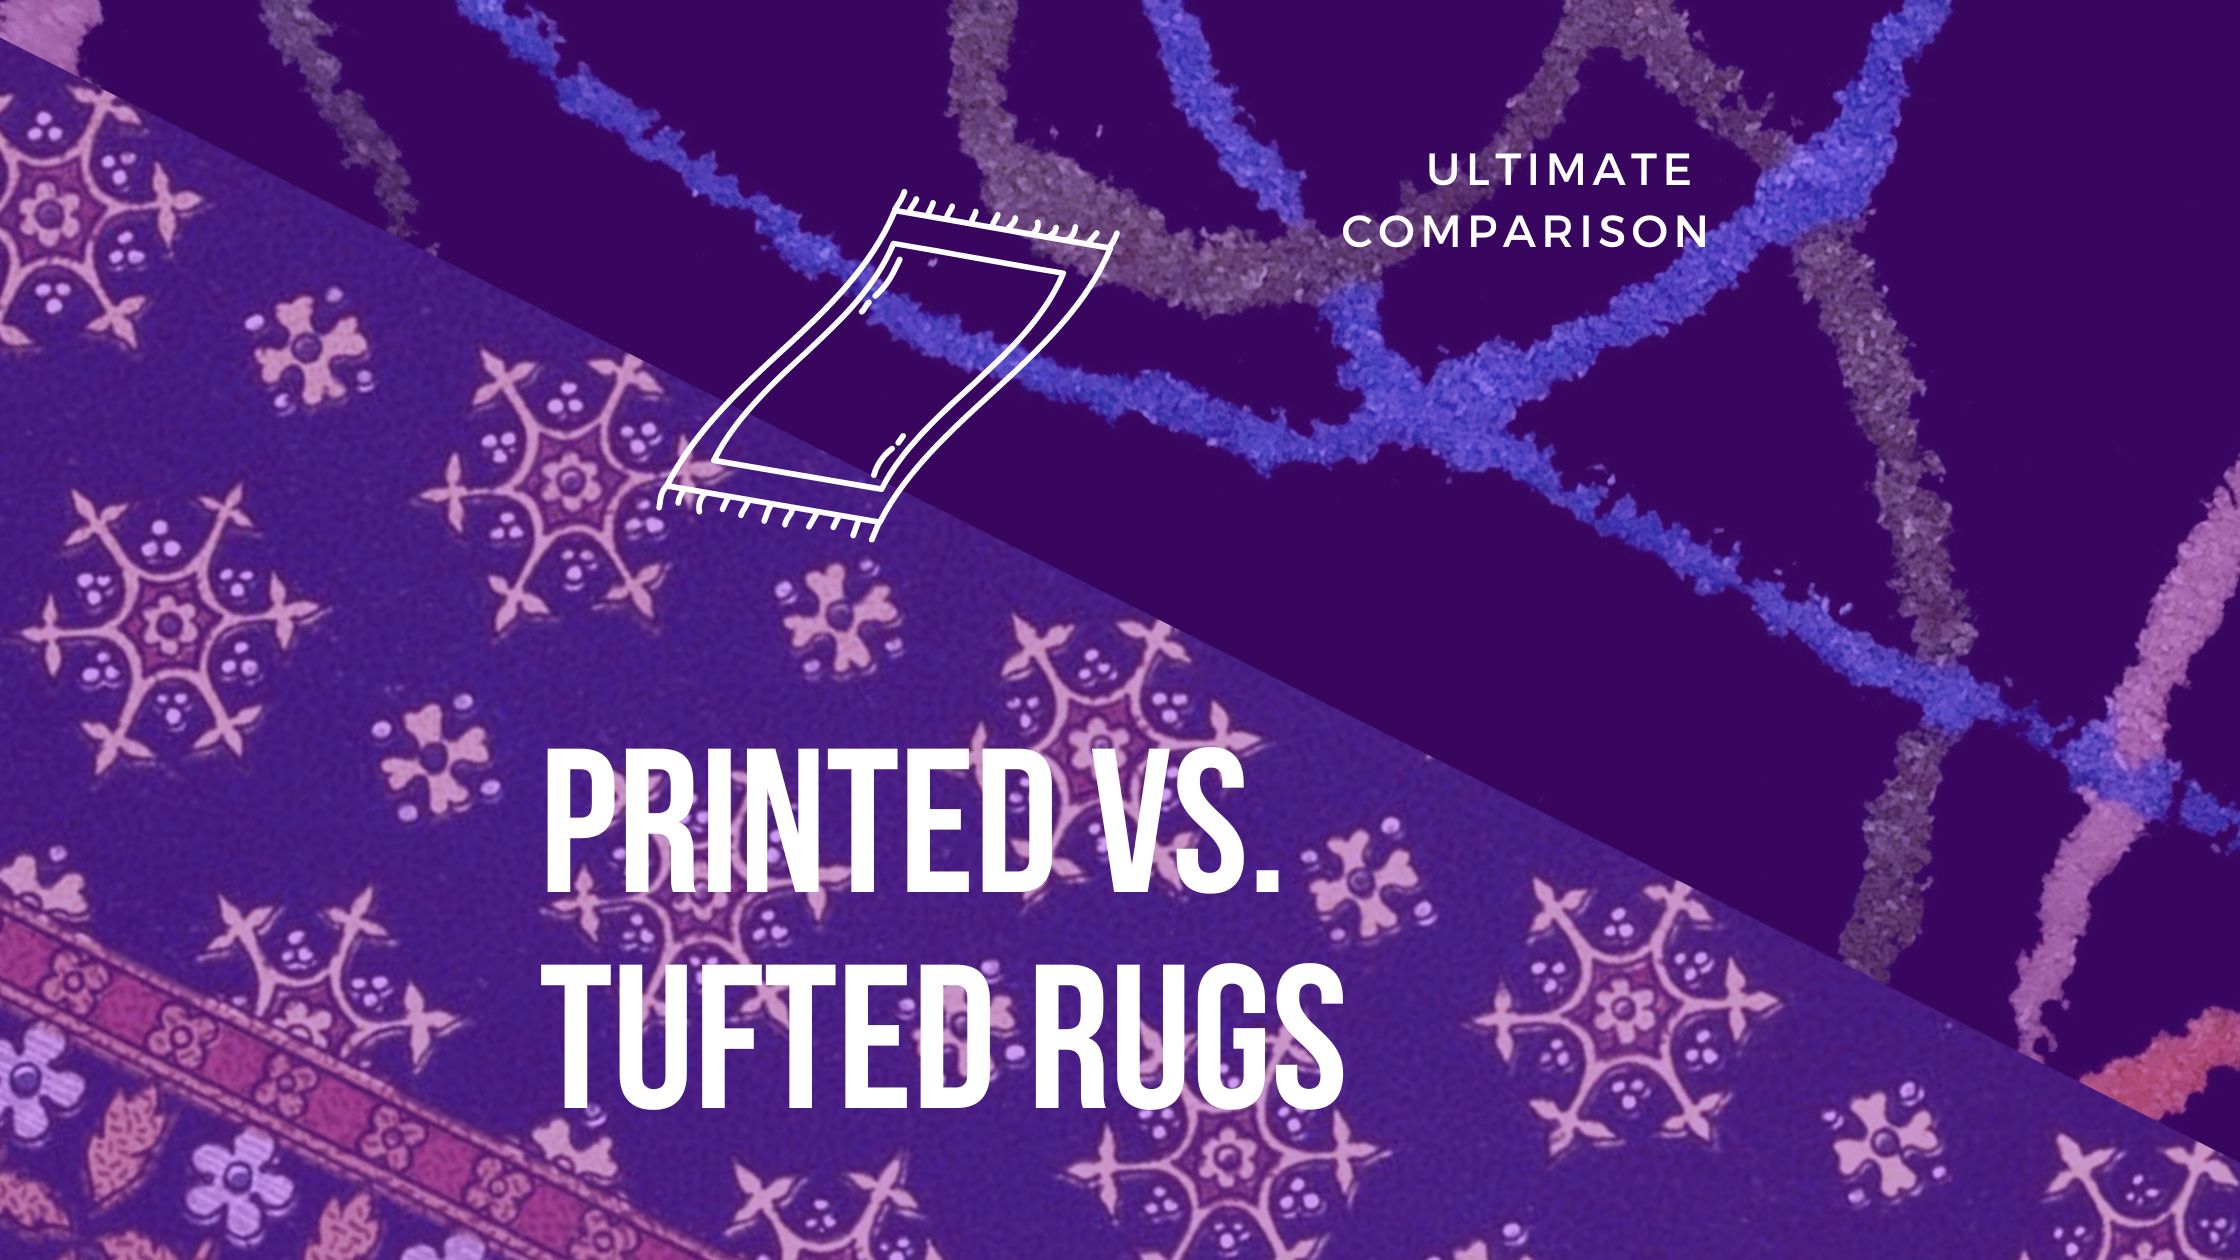 The differences between printed and tufted rugs. Printed Vs. Tufted Rugs, ULTIMATE COMPARISON